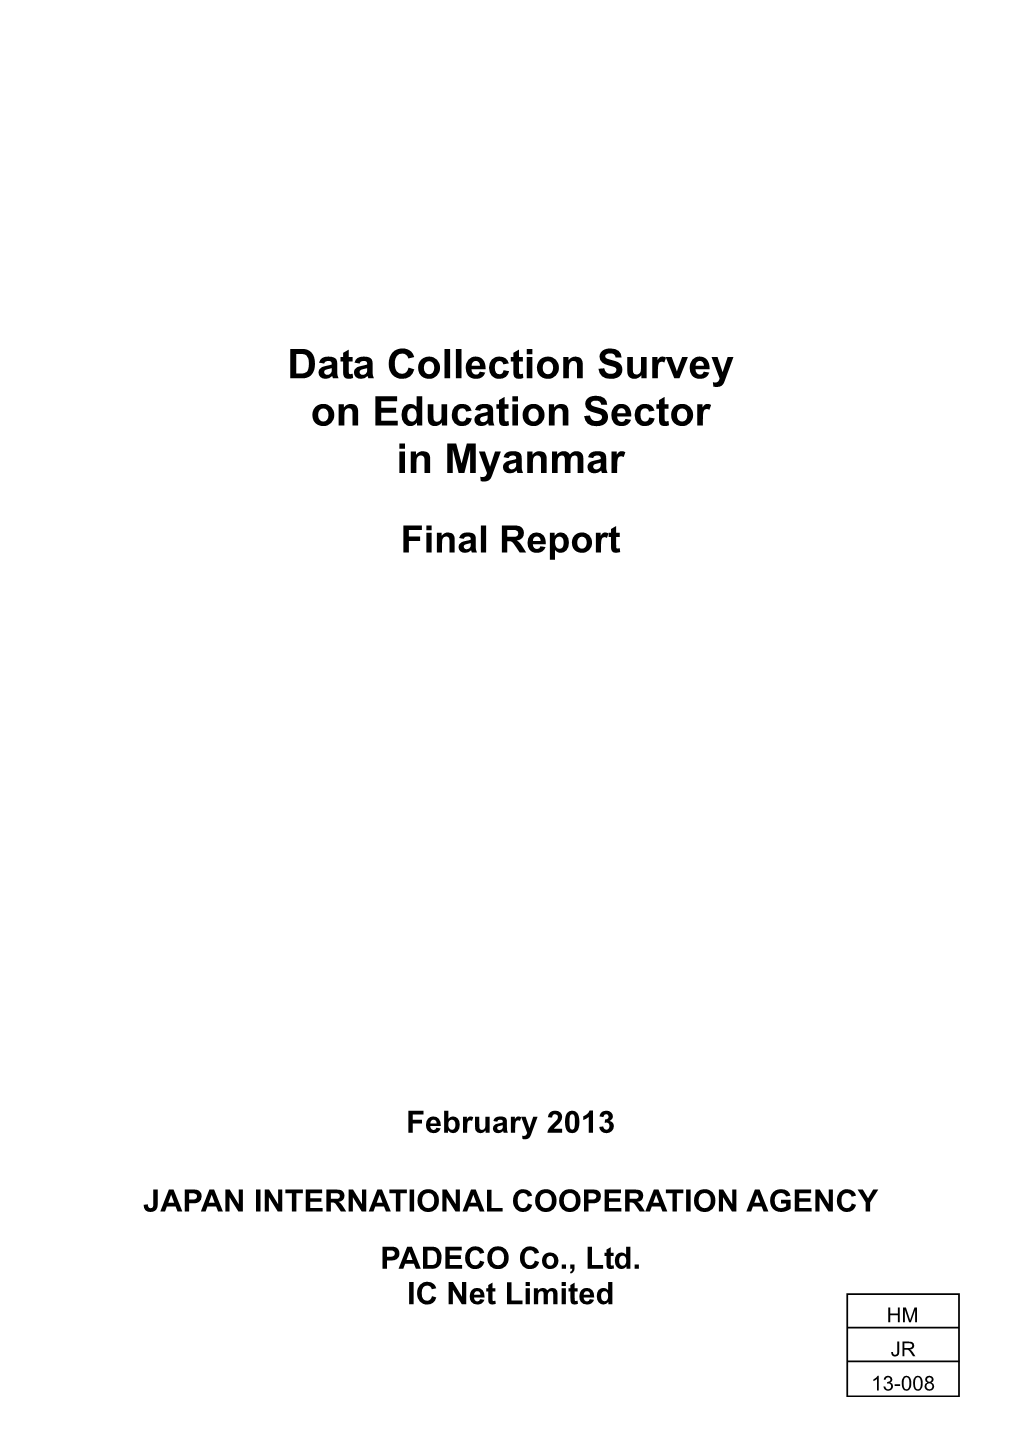 Data Collection Survey on Education Sector in Myanmar